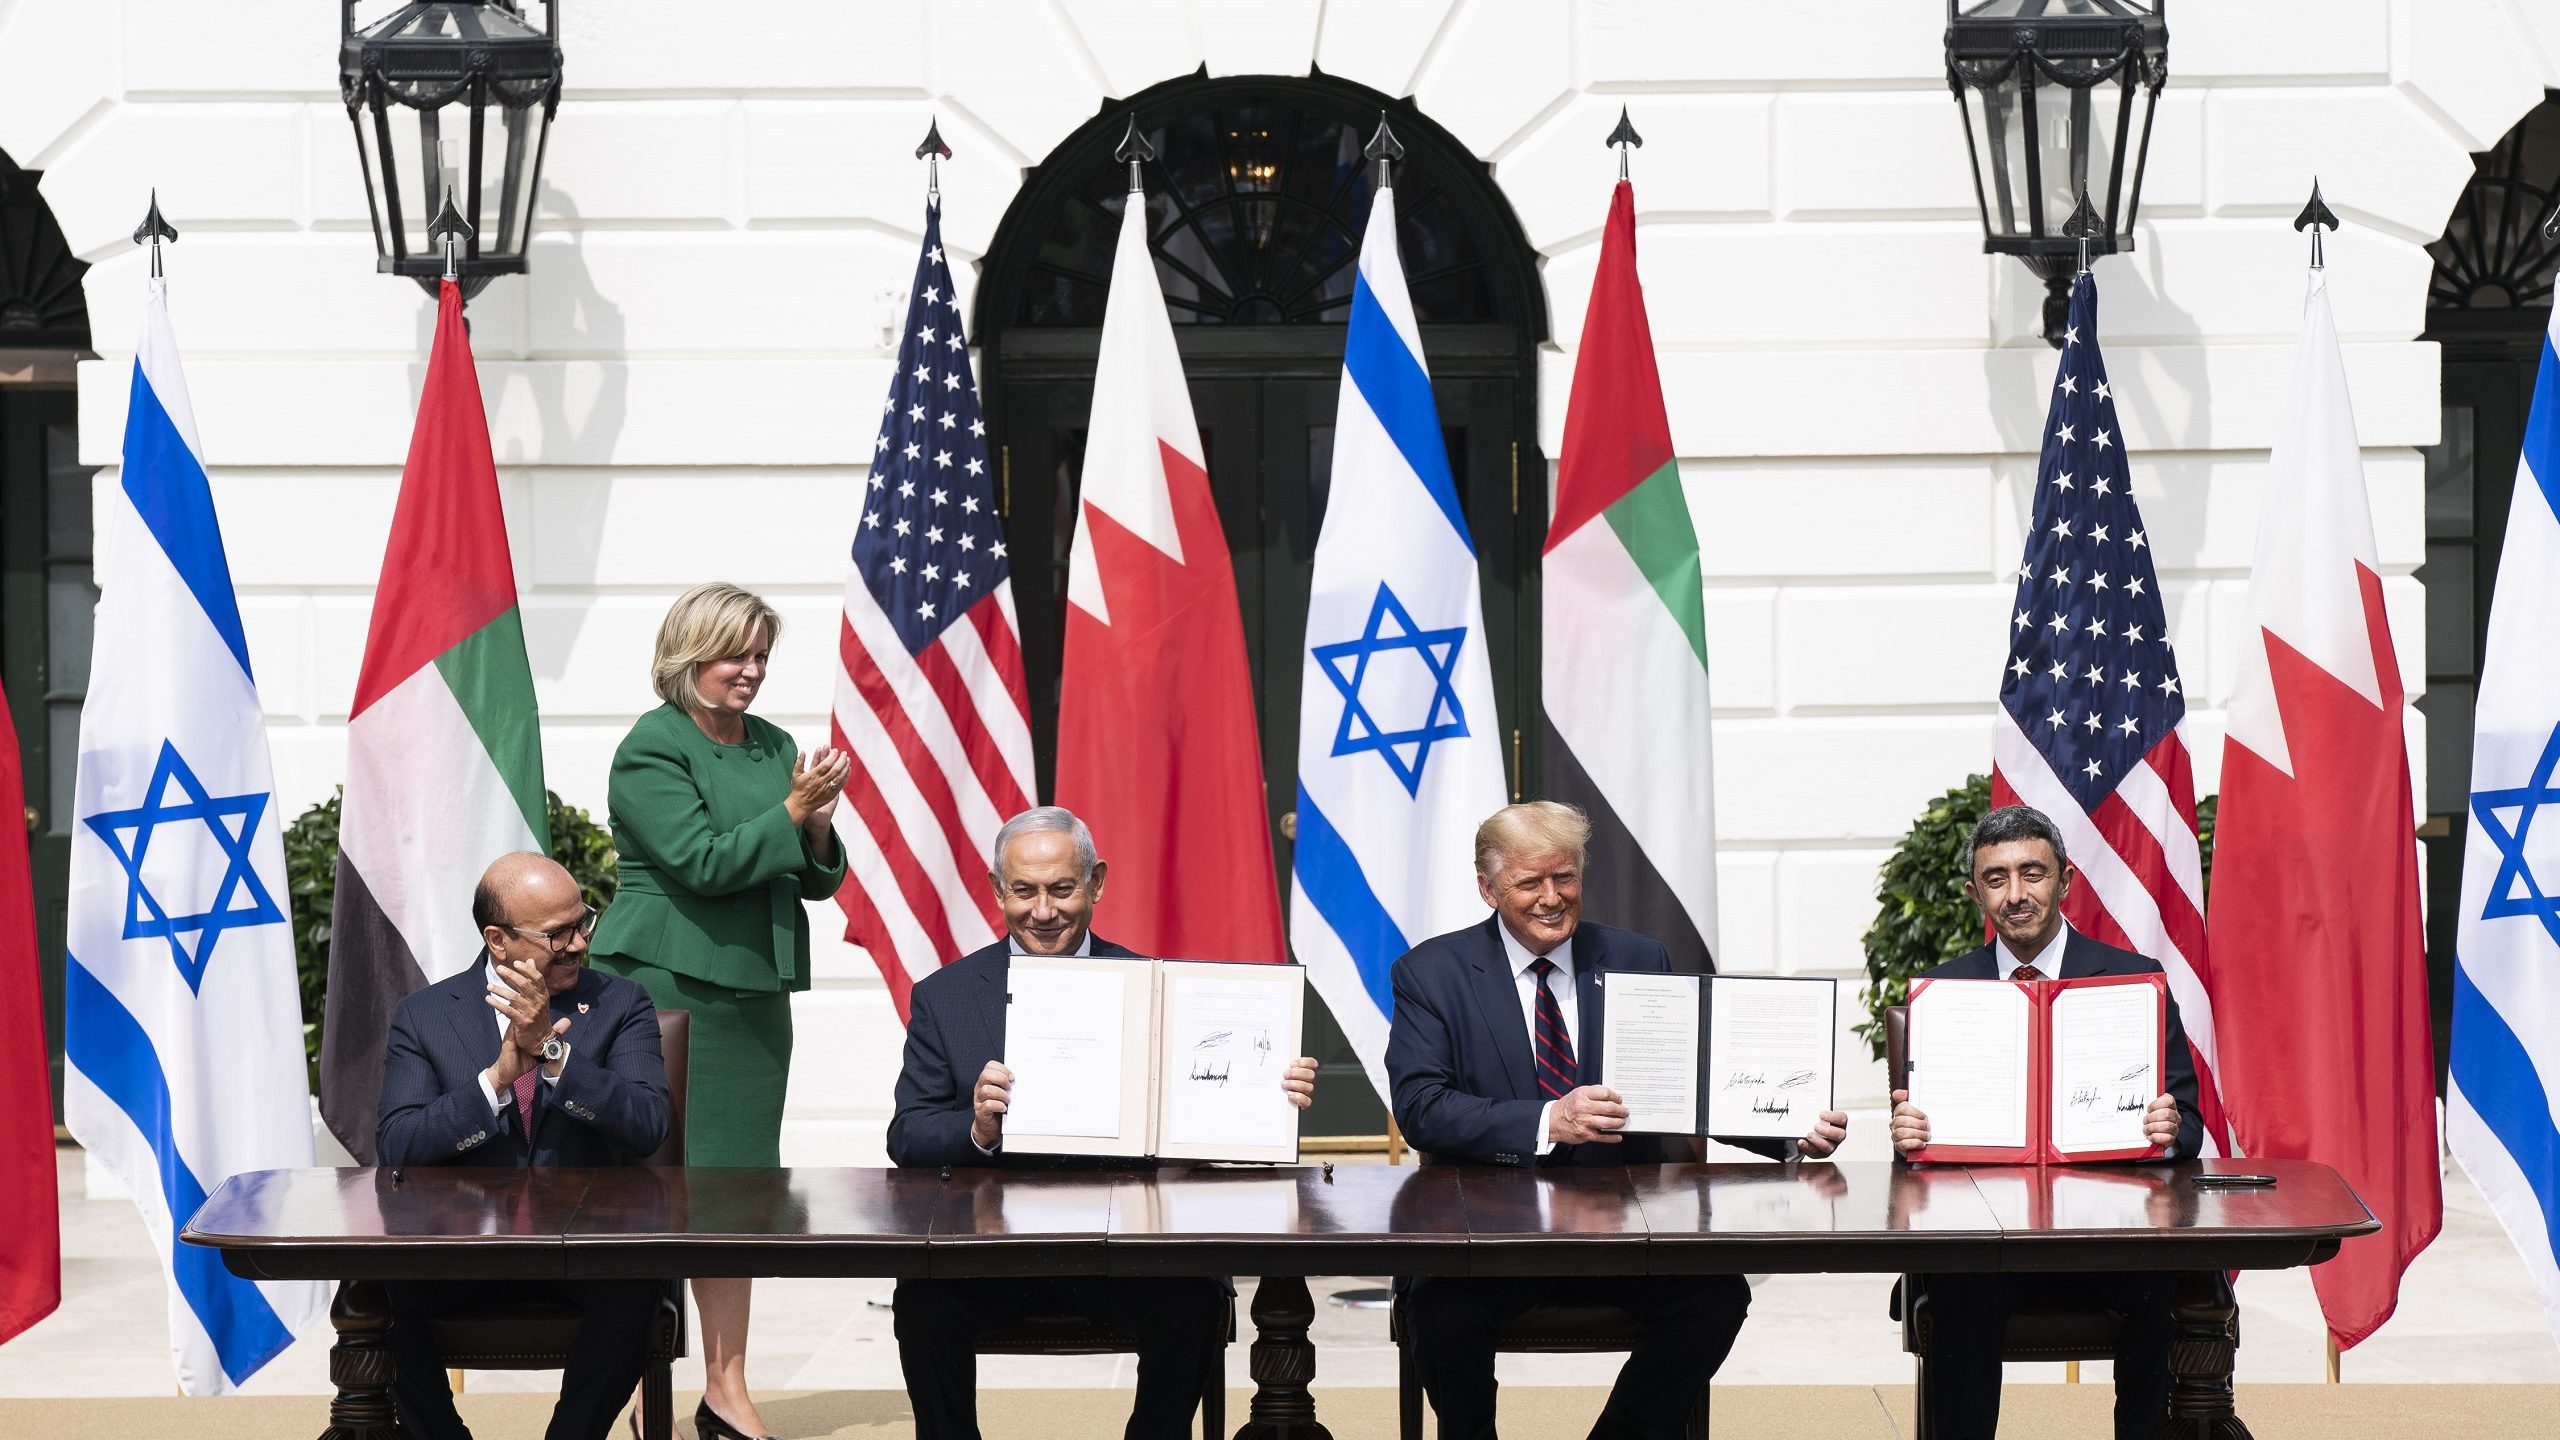 US and Abraham Accords Countries To Connect Citizens at Dubai Event